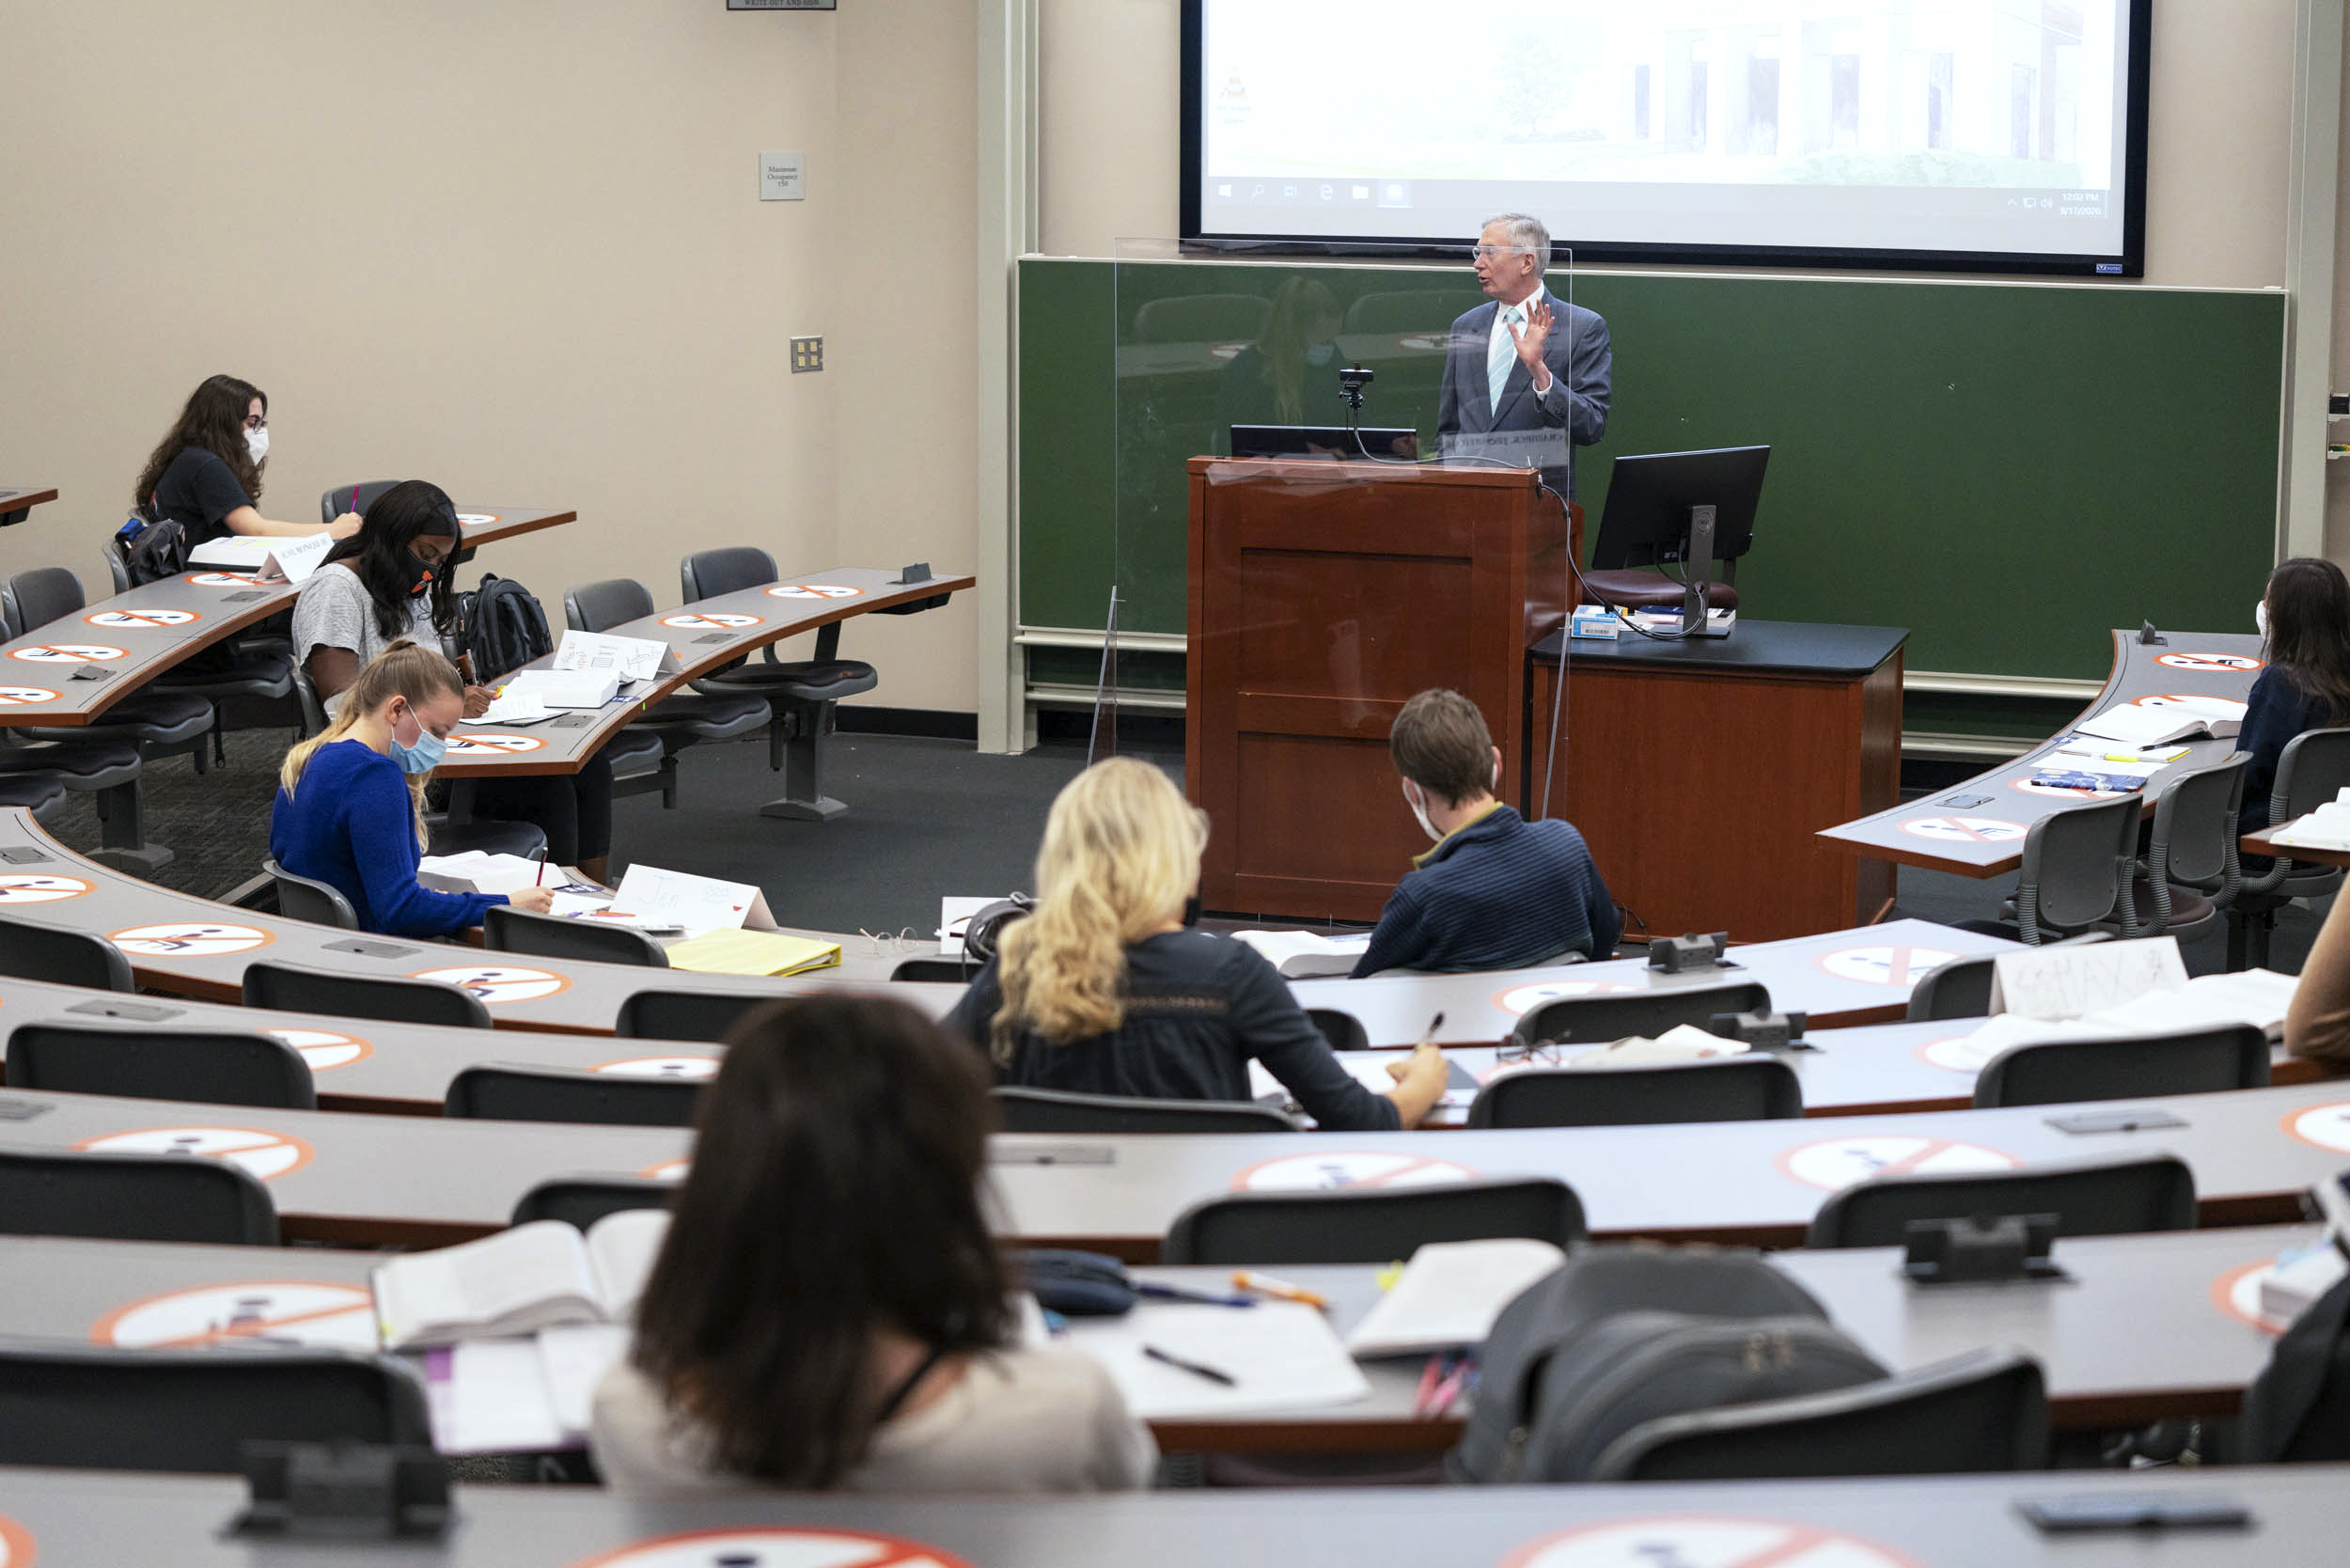 In School of Law professor Paul Mahoney's class, each seat is marked for physical distancing and Mahoney teaches behind a clear plastic shield, with a portion of the students attending in person and the remainder viewing the lecture synchronously online.